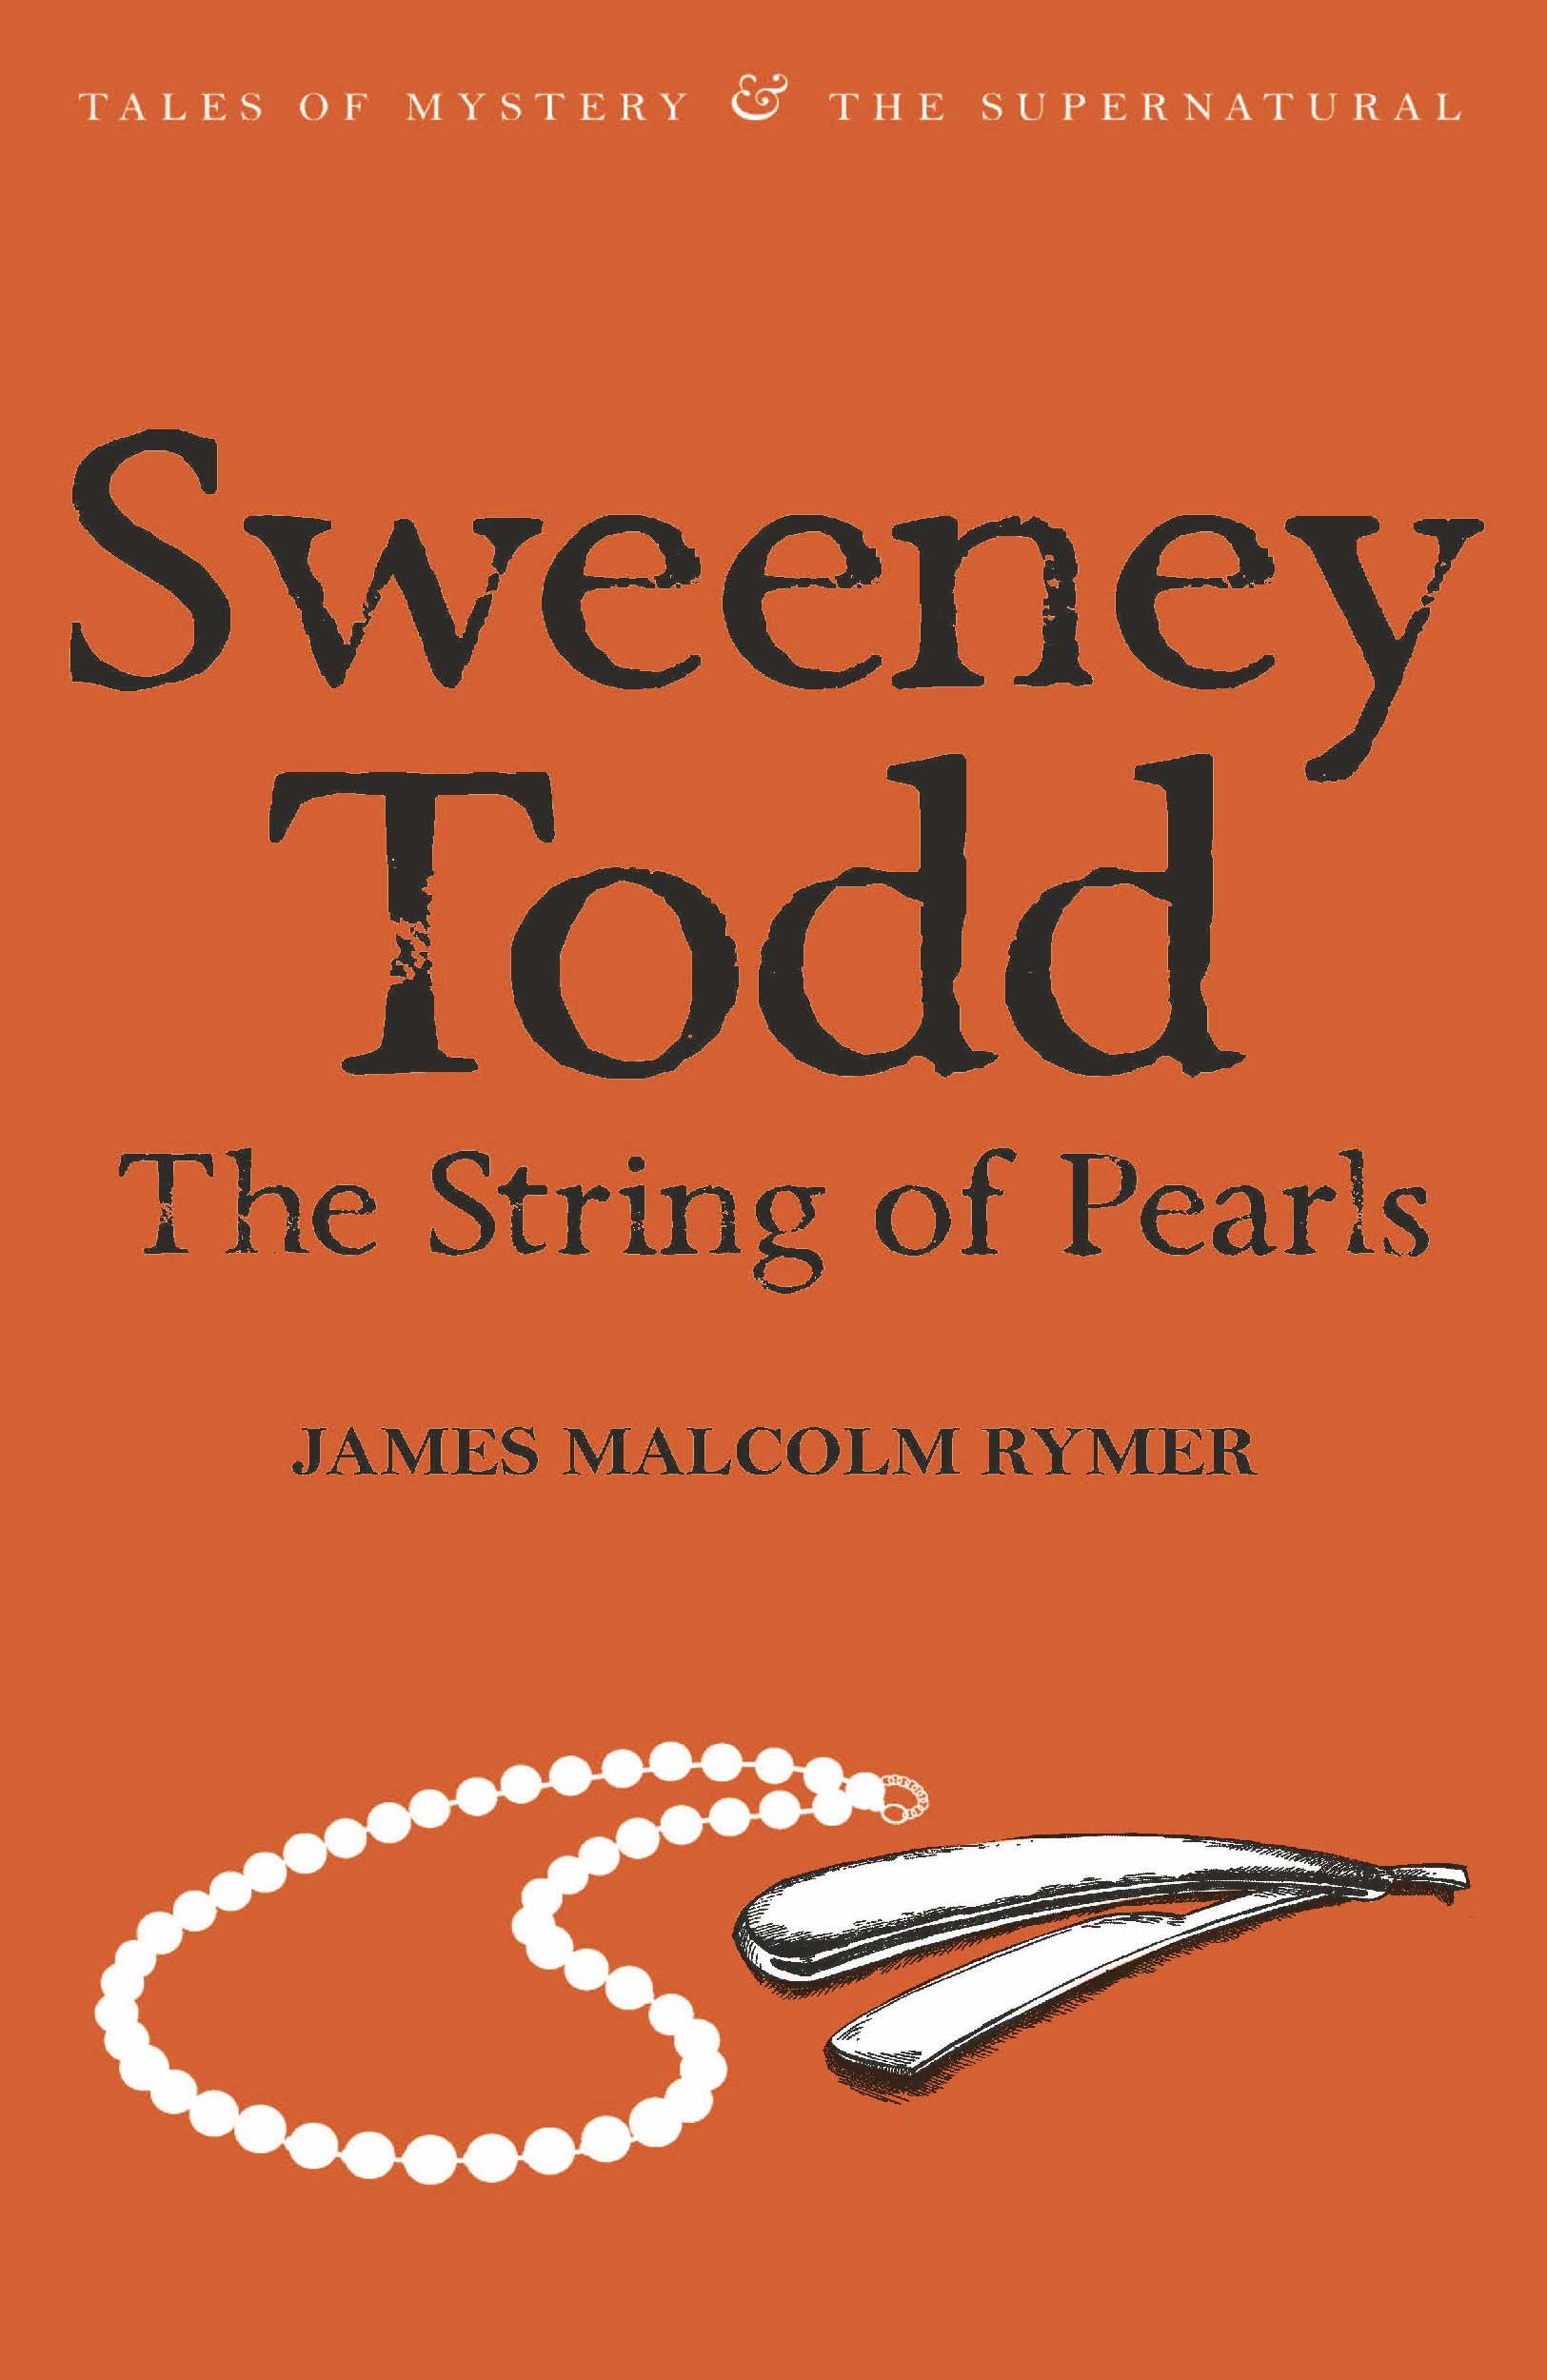 Sweeney Todd - The String of Pearls